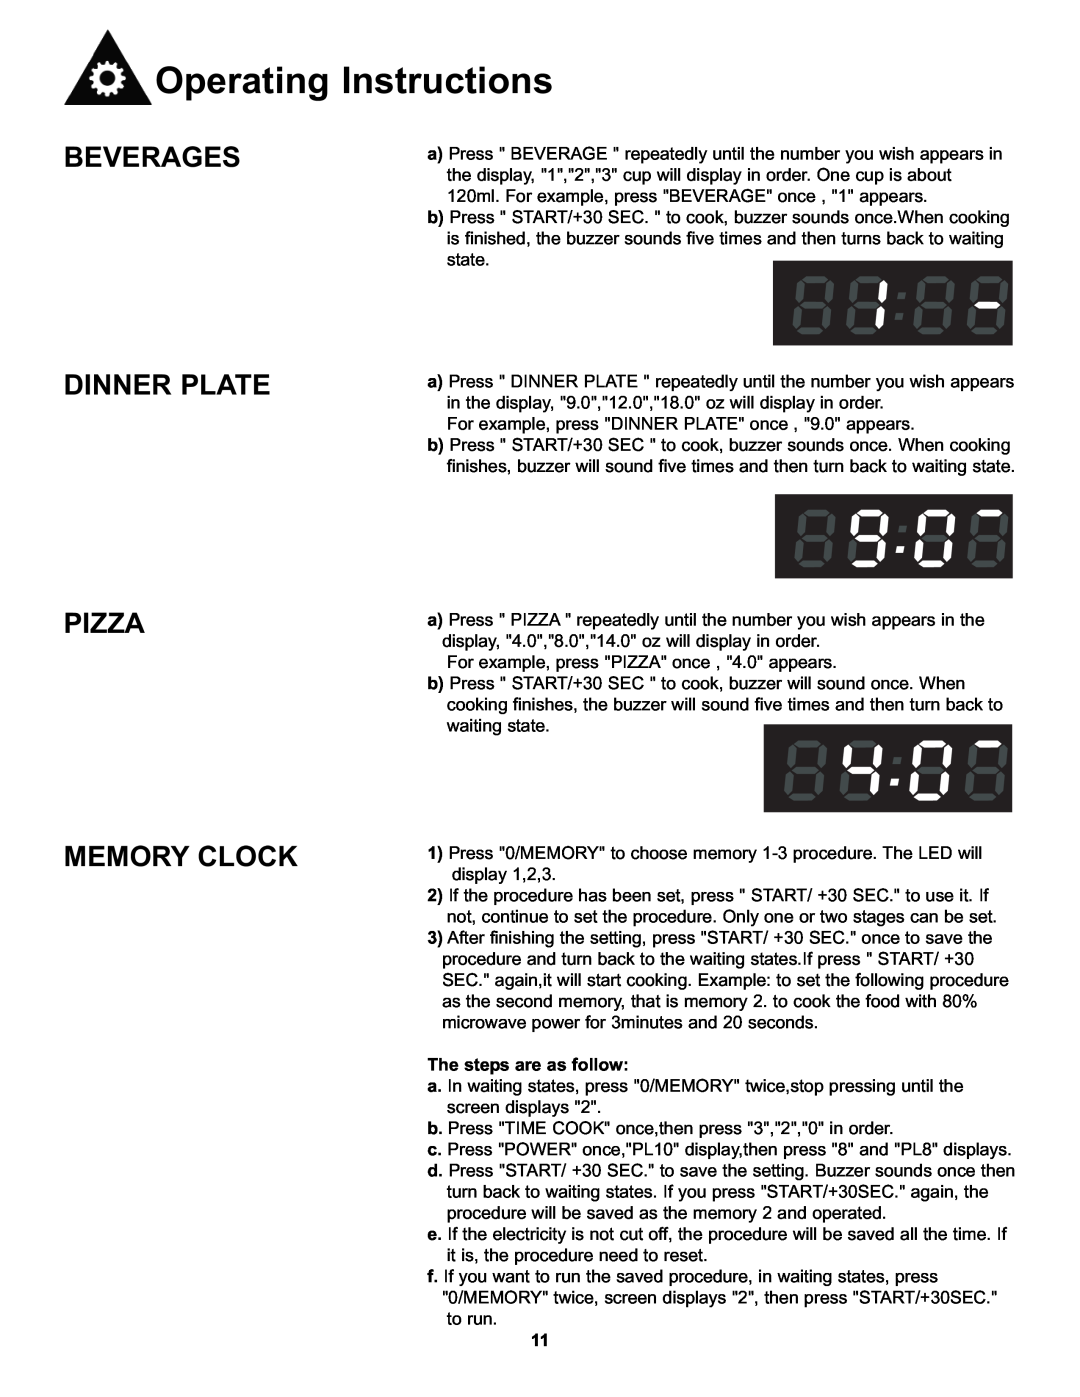 Danby DMW7700BLDB, DMW7700WDB Beverages Dinner Plate Pizza Memory Clock, Operating Instructions, The steps are as follow 